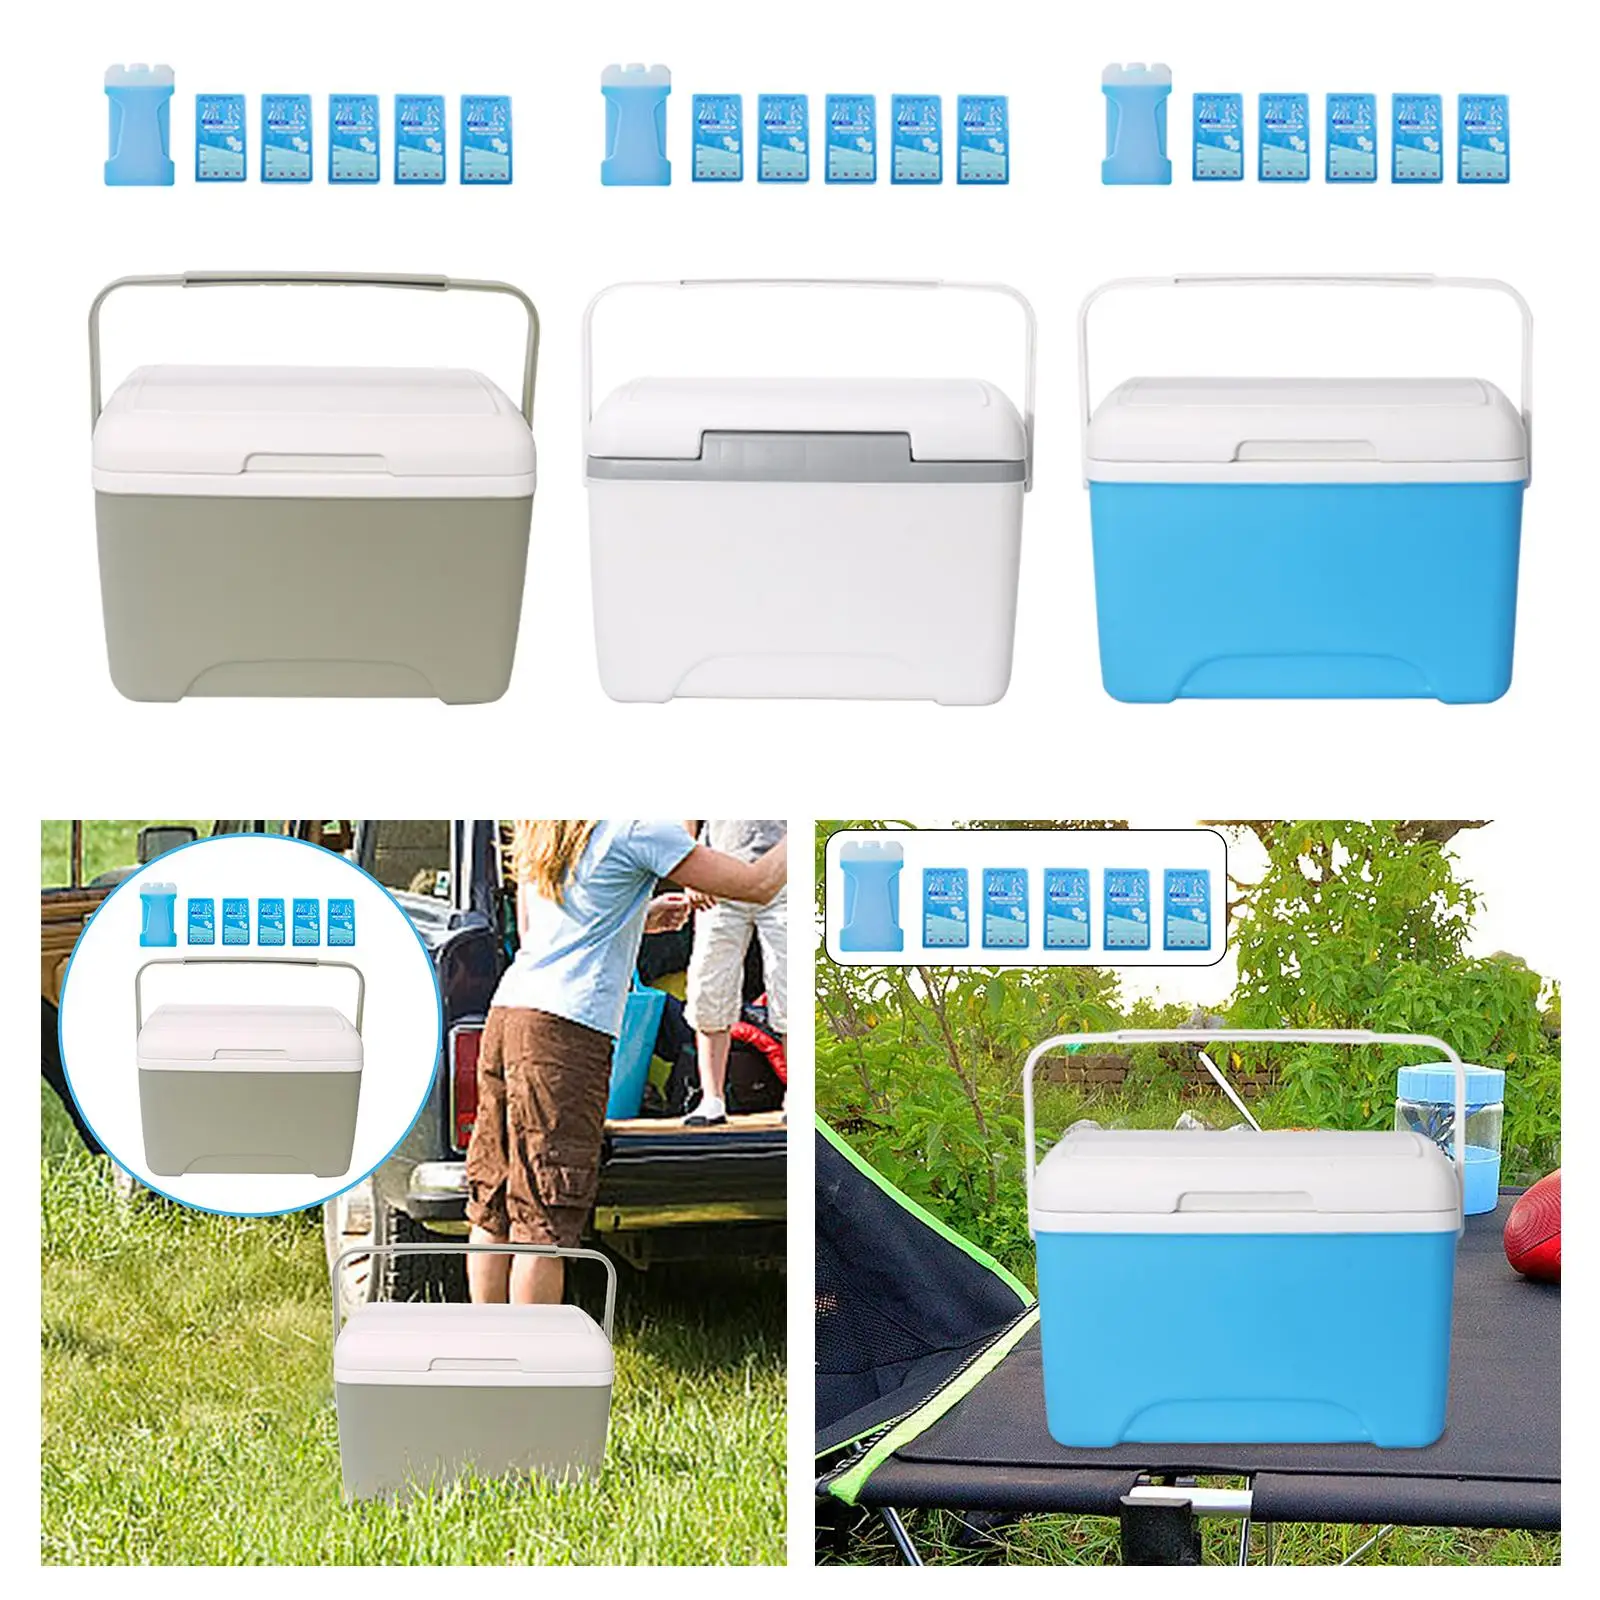 8L Insulated Portable Cooler Beverage Storage Organizer Ice Box Insulated Thermal Cooler for Boating Beach Travel Barbecue Party